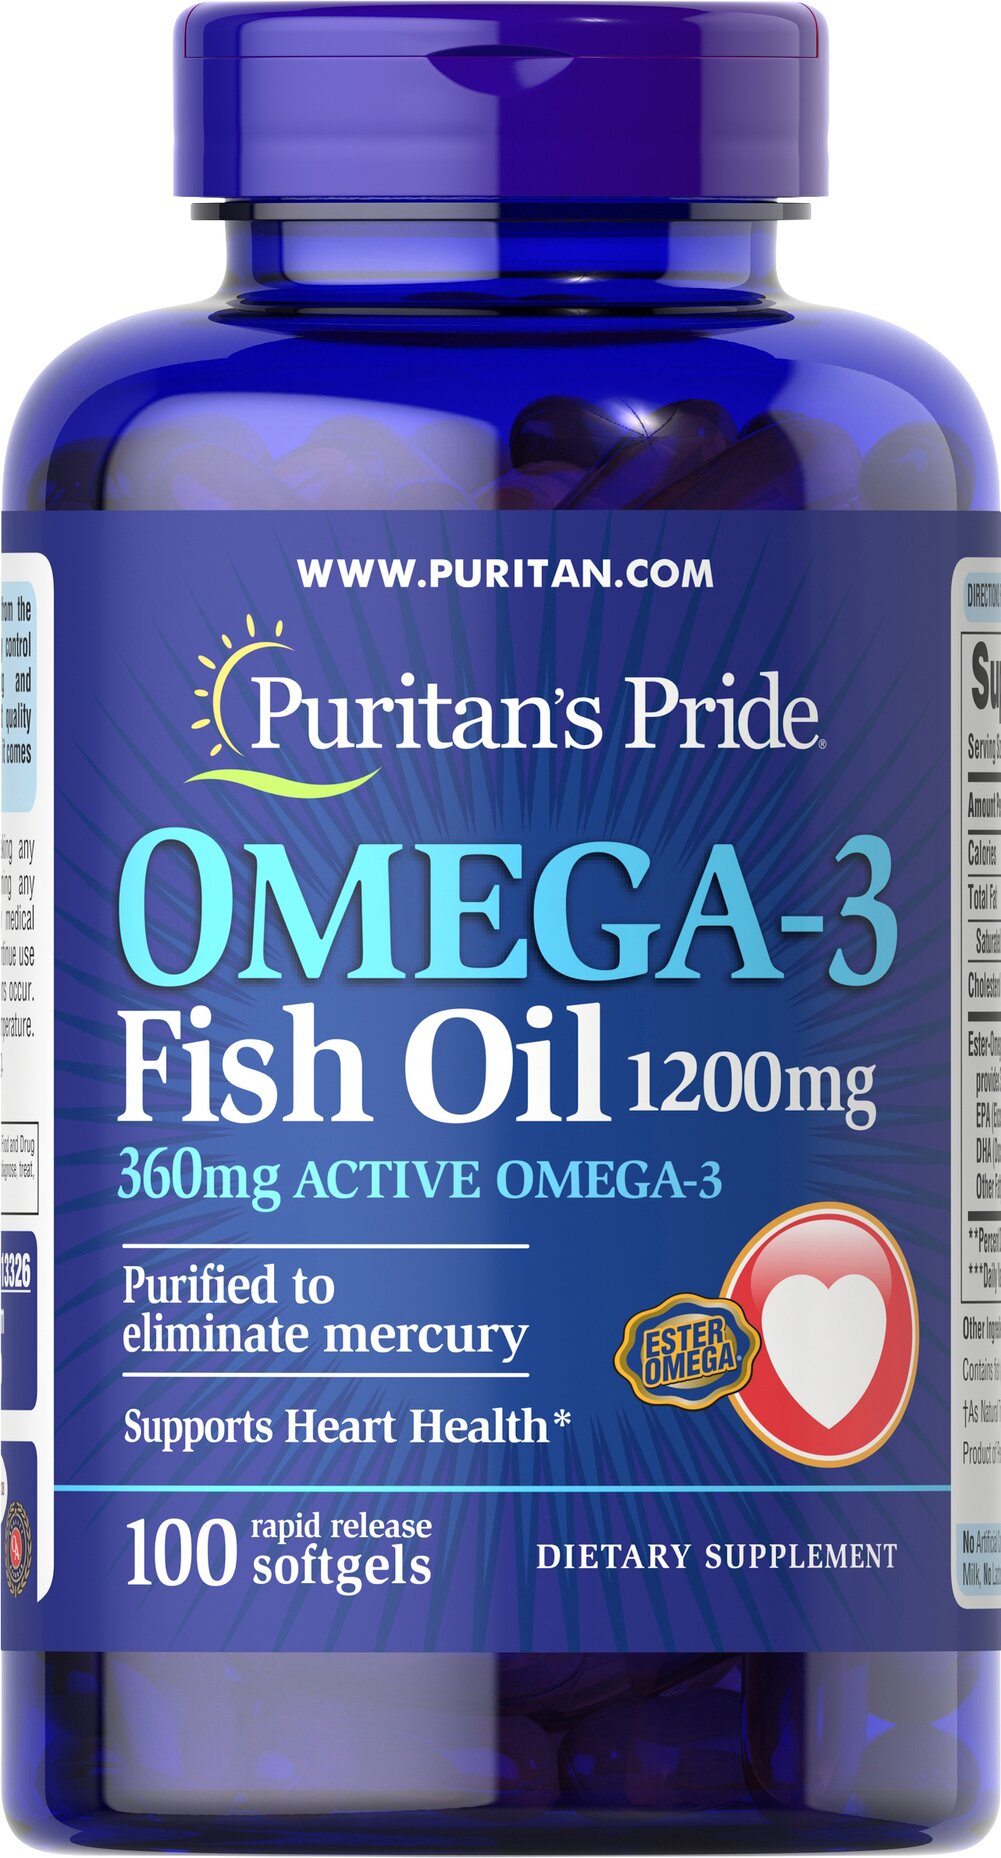 Puritans Pride Omega-3 Fish Oil 1200 мг (360 мг Active Omega-3) 100 капс.